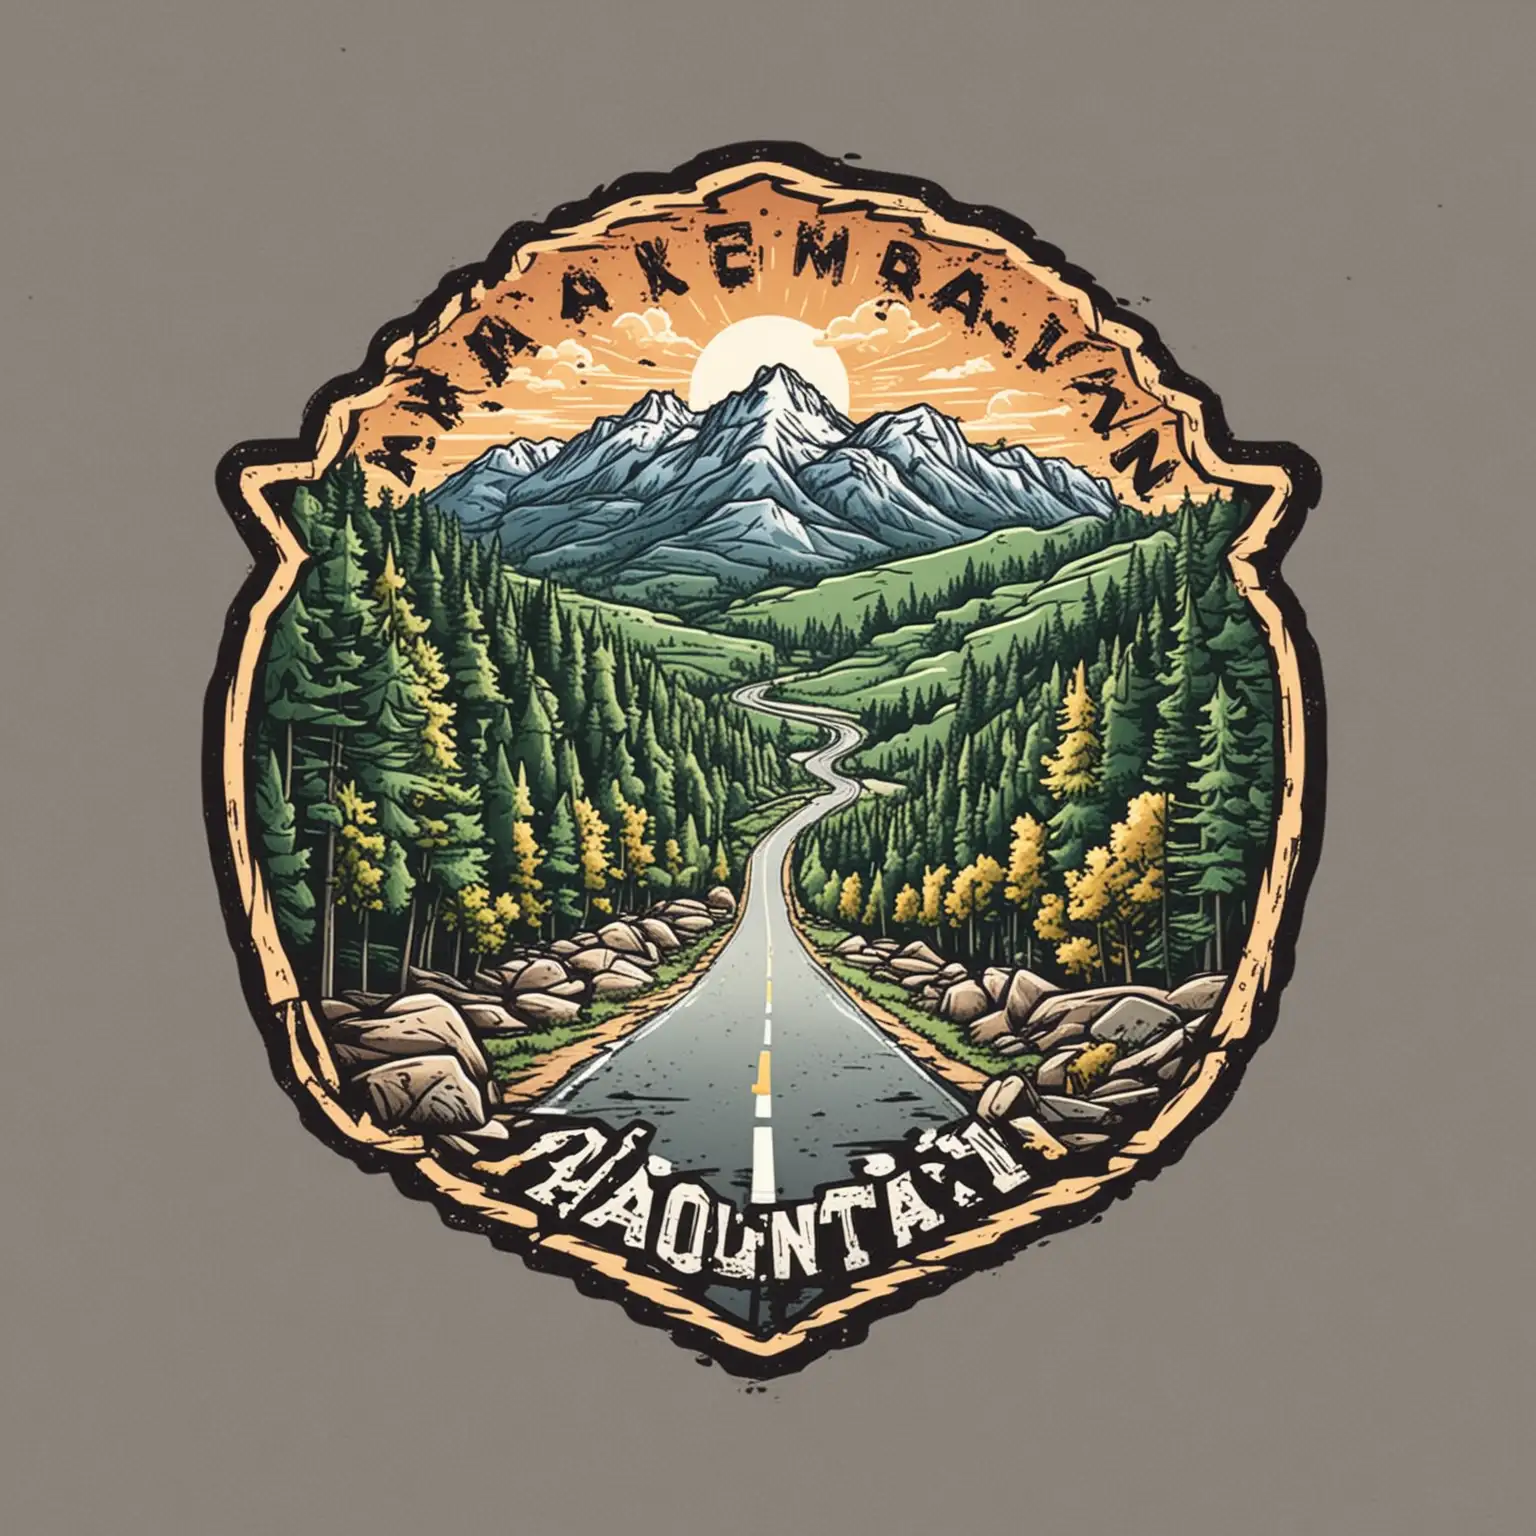 Badge Style T-shirt Design for "MEET UP IN THE MOUNTAINS" With Appalachian Mountains in the background that comes down to a asphalt road. Cartoon Style Vector Clean Lines Spot Color